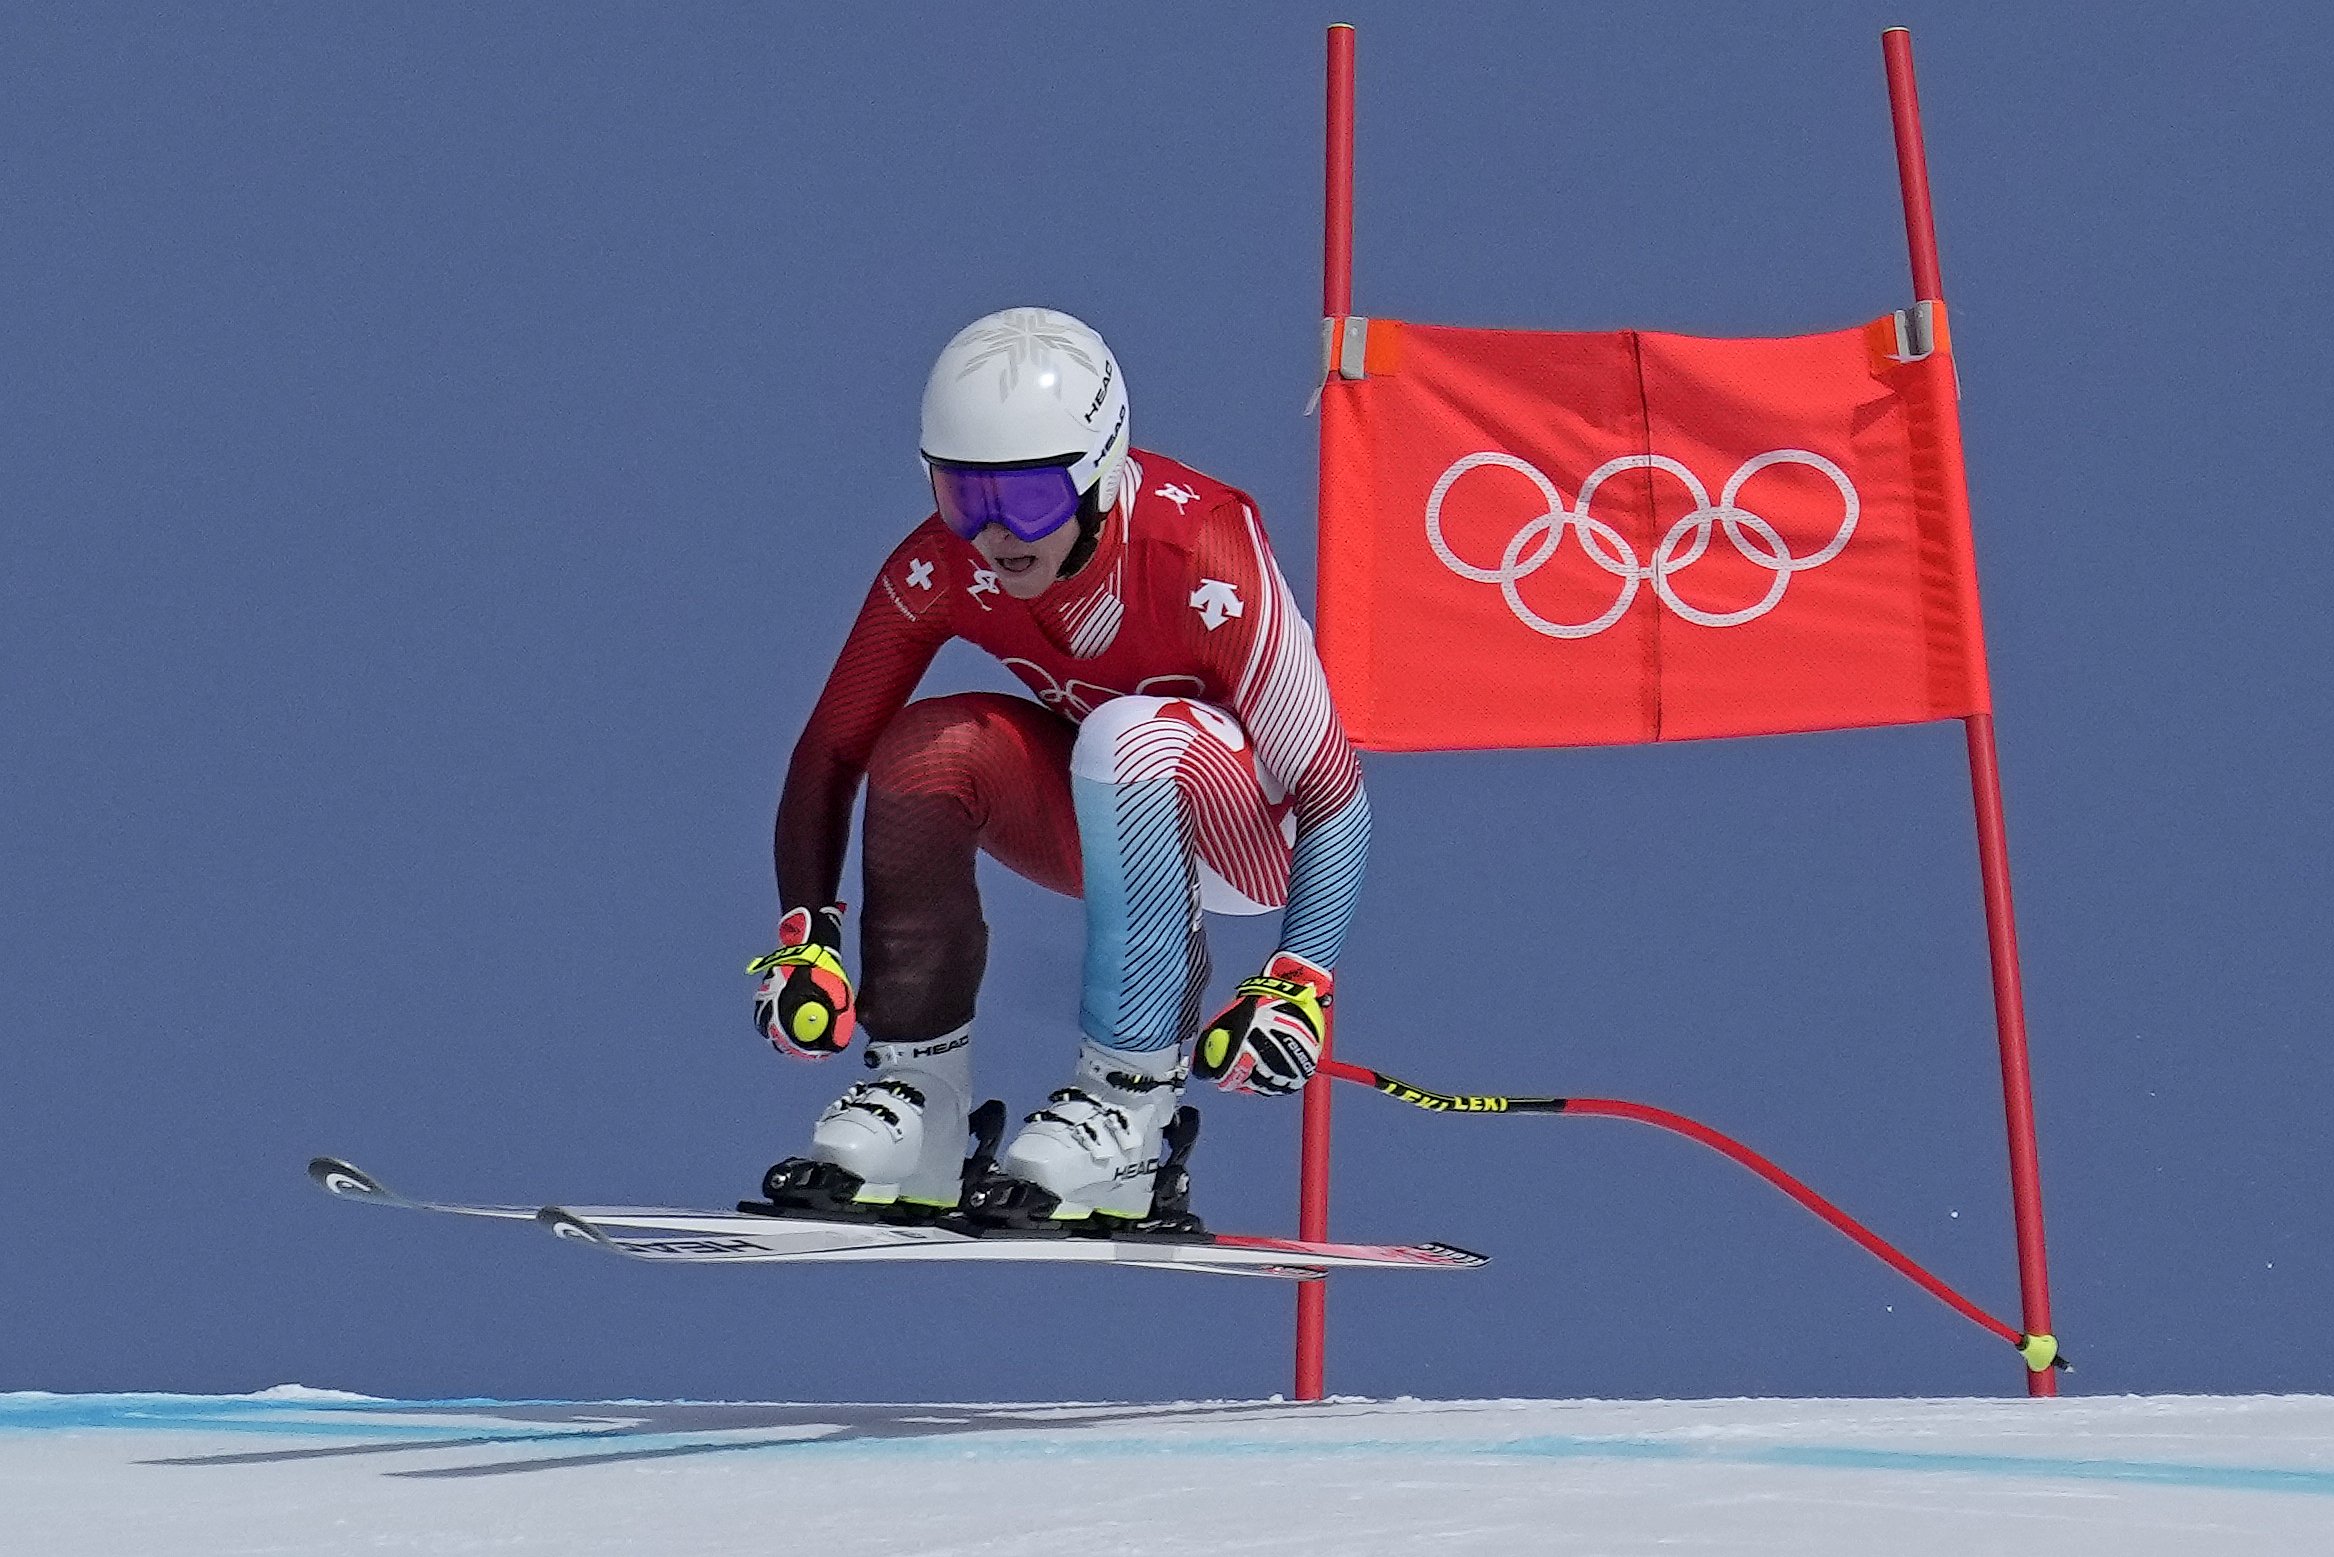  Lara Gut-Behrami, of Switzerland makes a jump during the women's super-G at the 2022 Winter Olympics, Friday, Feb. 11, 2022, in the Yanqing district of Beijing. (AP Photo/Robert F. Bukaty) 